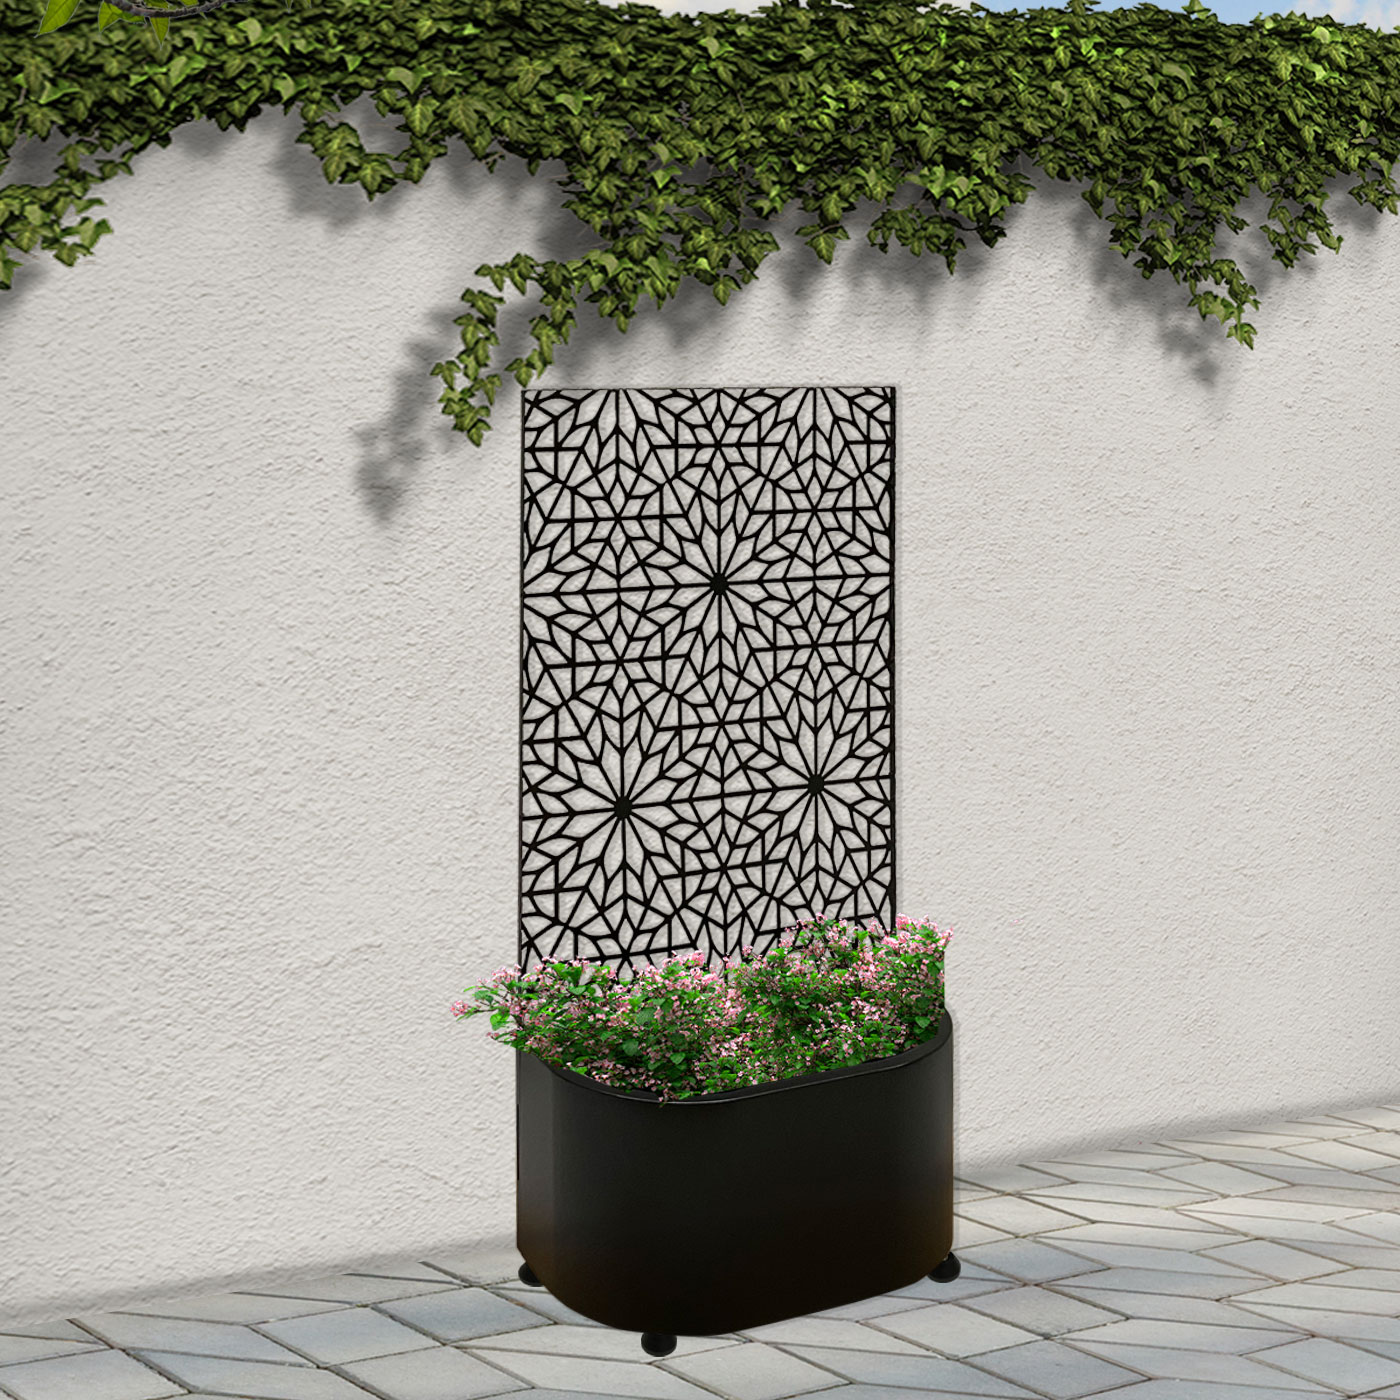 'Ria' Garden Screen with Rounded Planter 